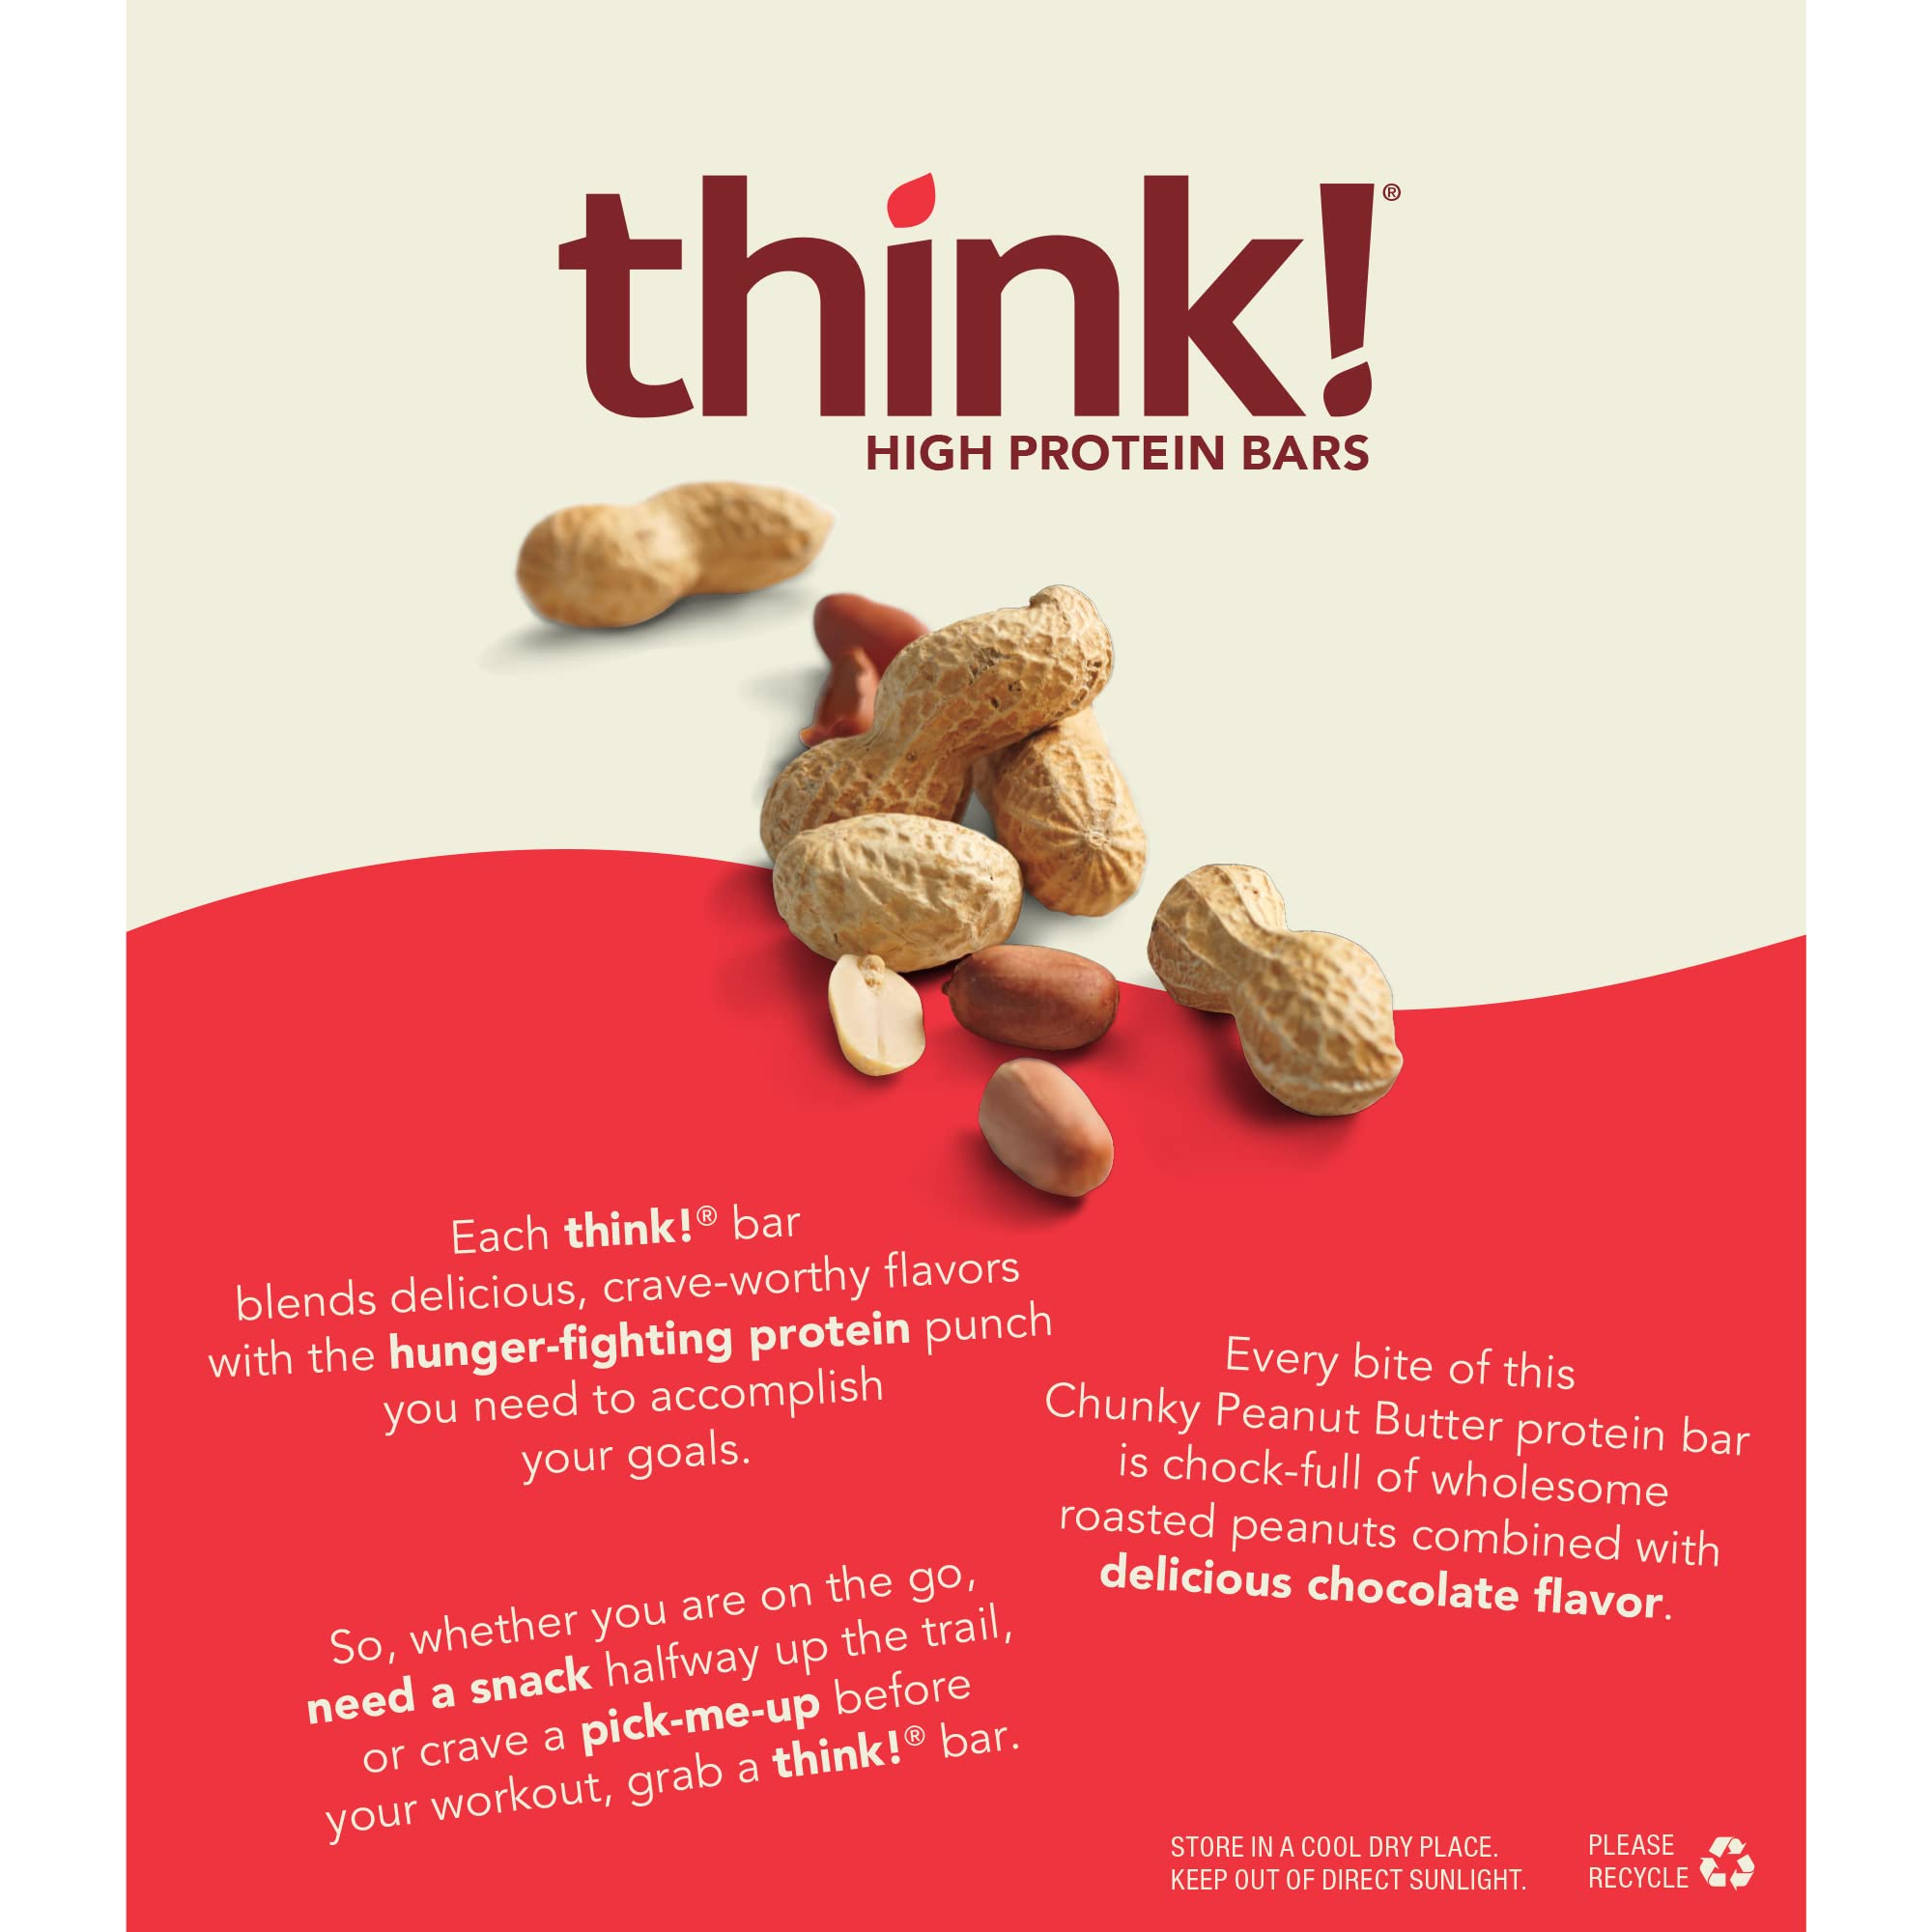 think! Protein Bars, High Protein Snacks, Gluten Free, Sugar Free Energy Bar with Whey Protein Isolate, Chunky Peanut Butter, Nutrition Bars without Artificial Sweeteners, 2.1 Oz (10 Count)